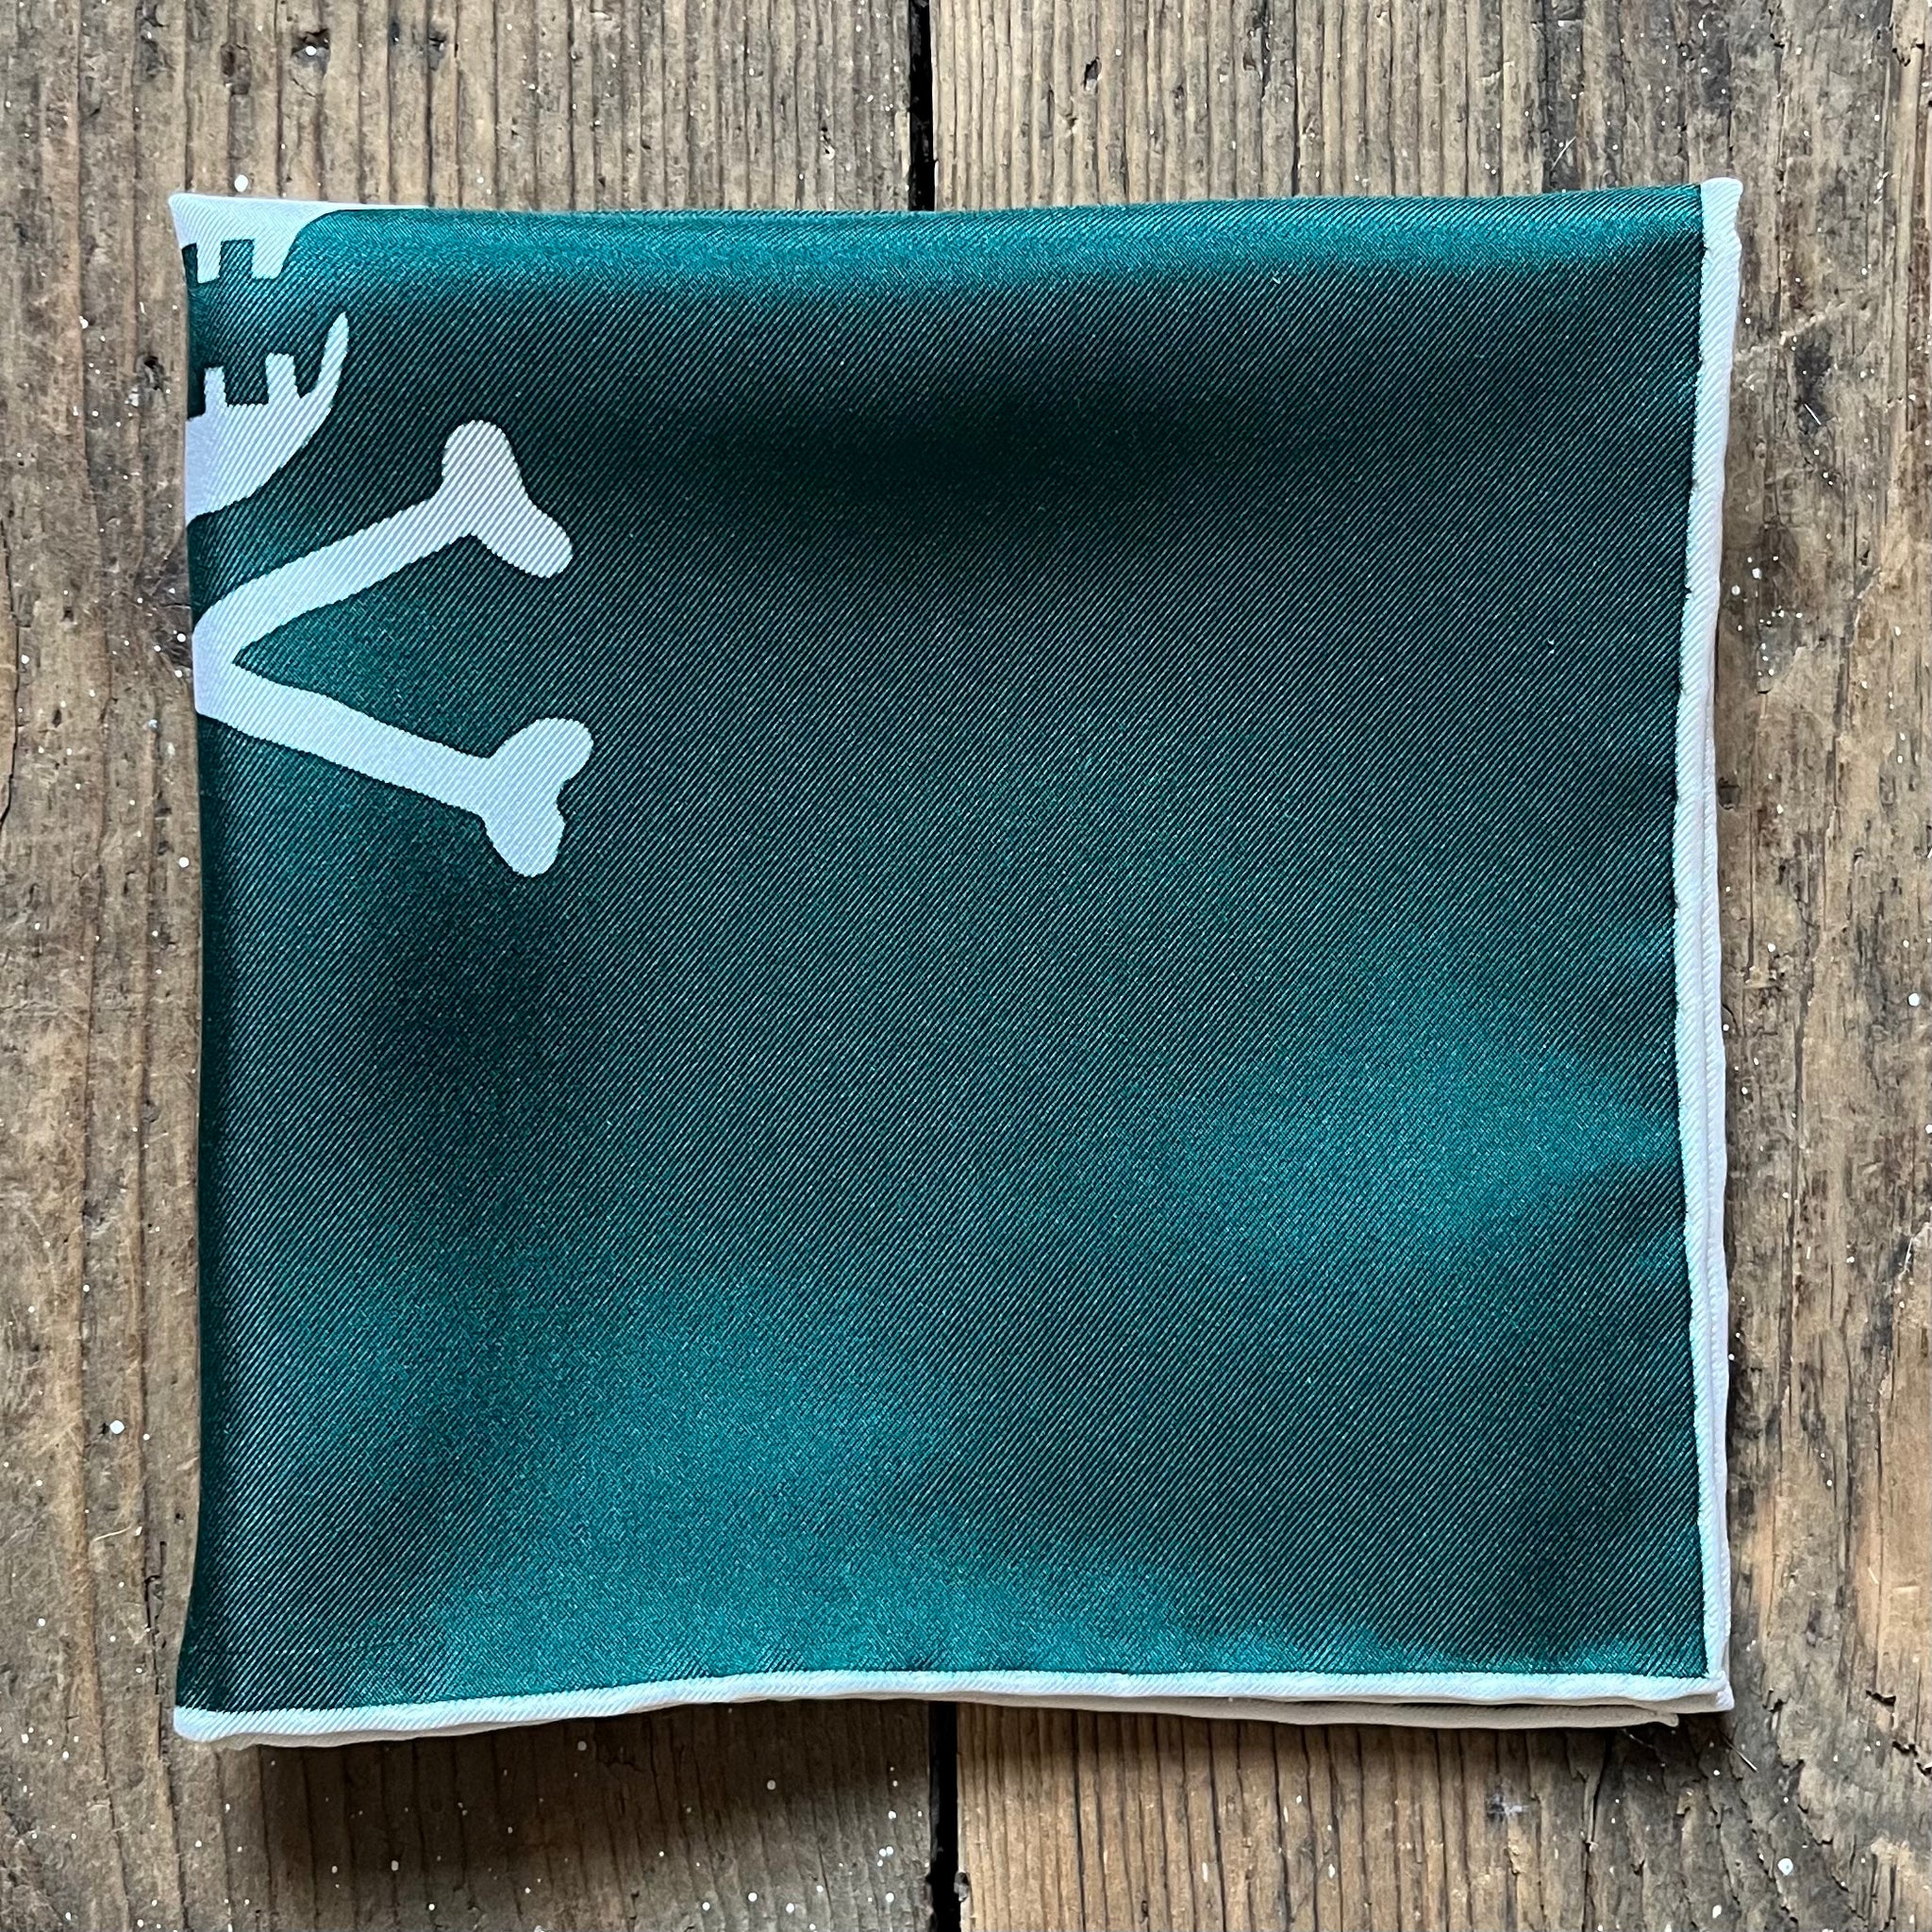 Racing green silk pocket square with Regent butterfly and skull logo